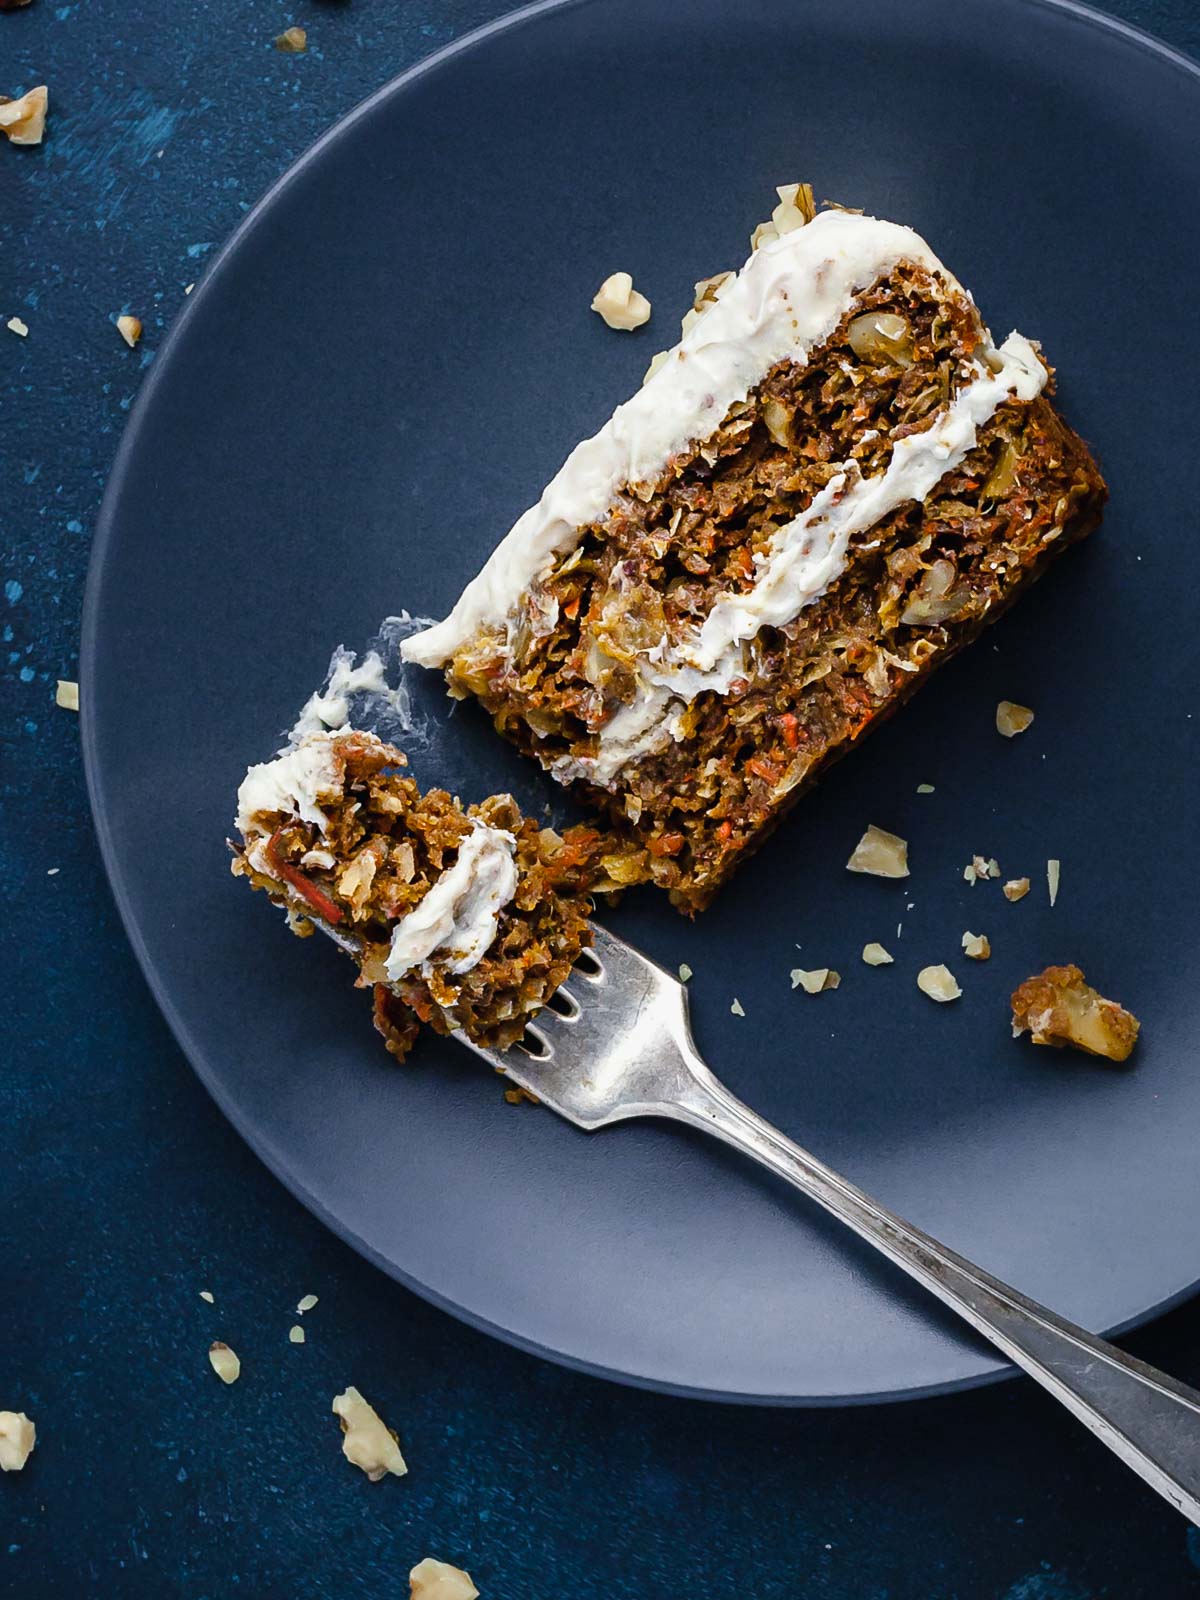 Overhead image of a slice of carrot cake on its side on a blue plate.